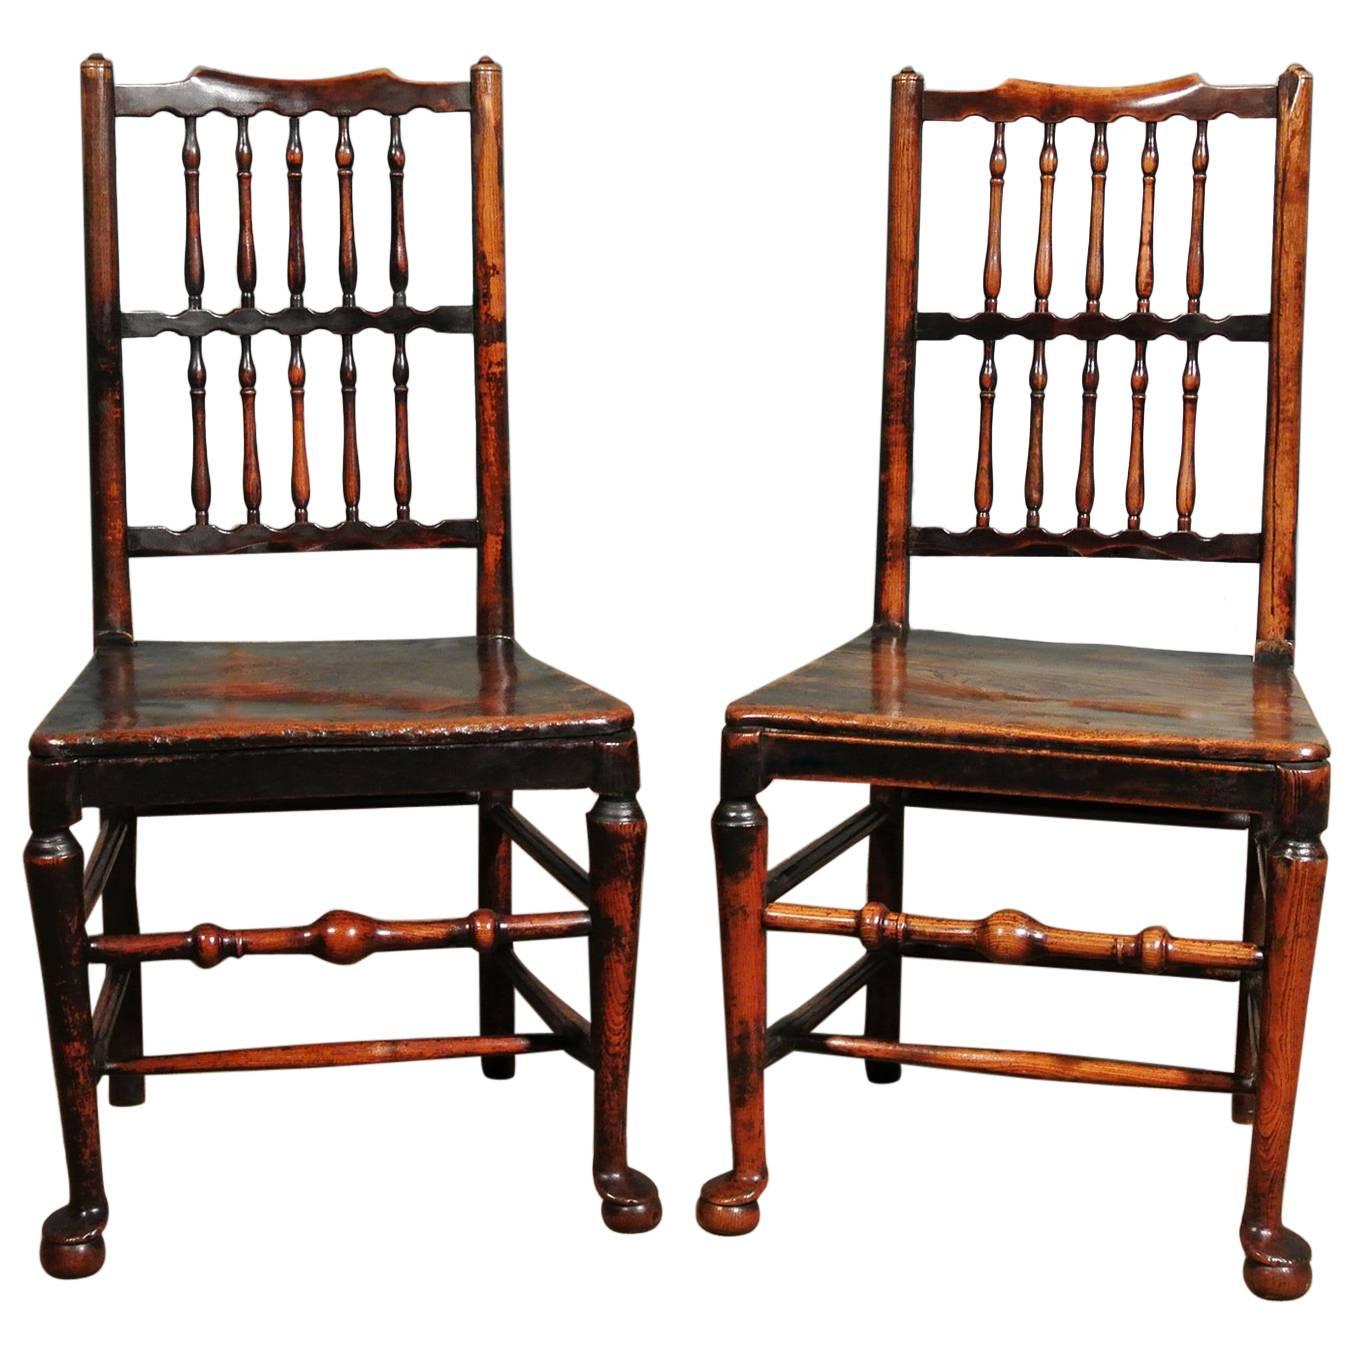 Pair of 18th Century Elm Spindle Back Chairs with Exemplary Patina, circa 1750 For Sale